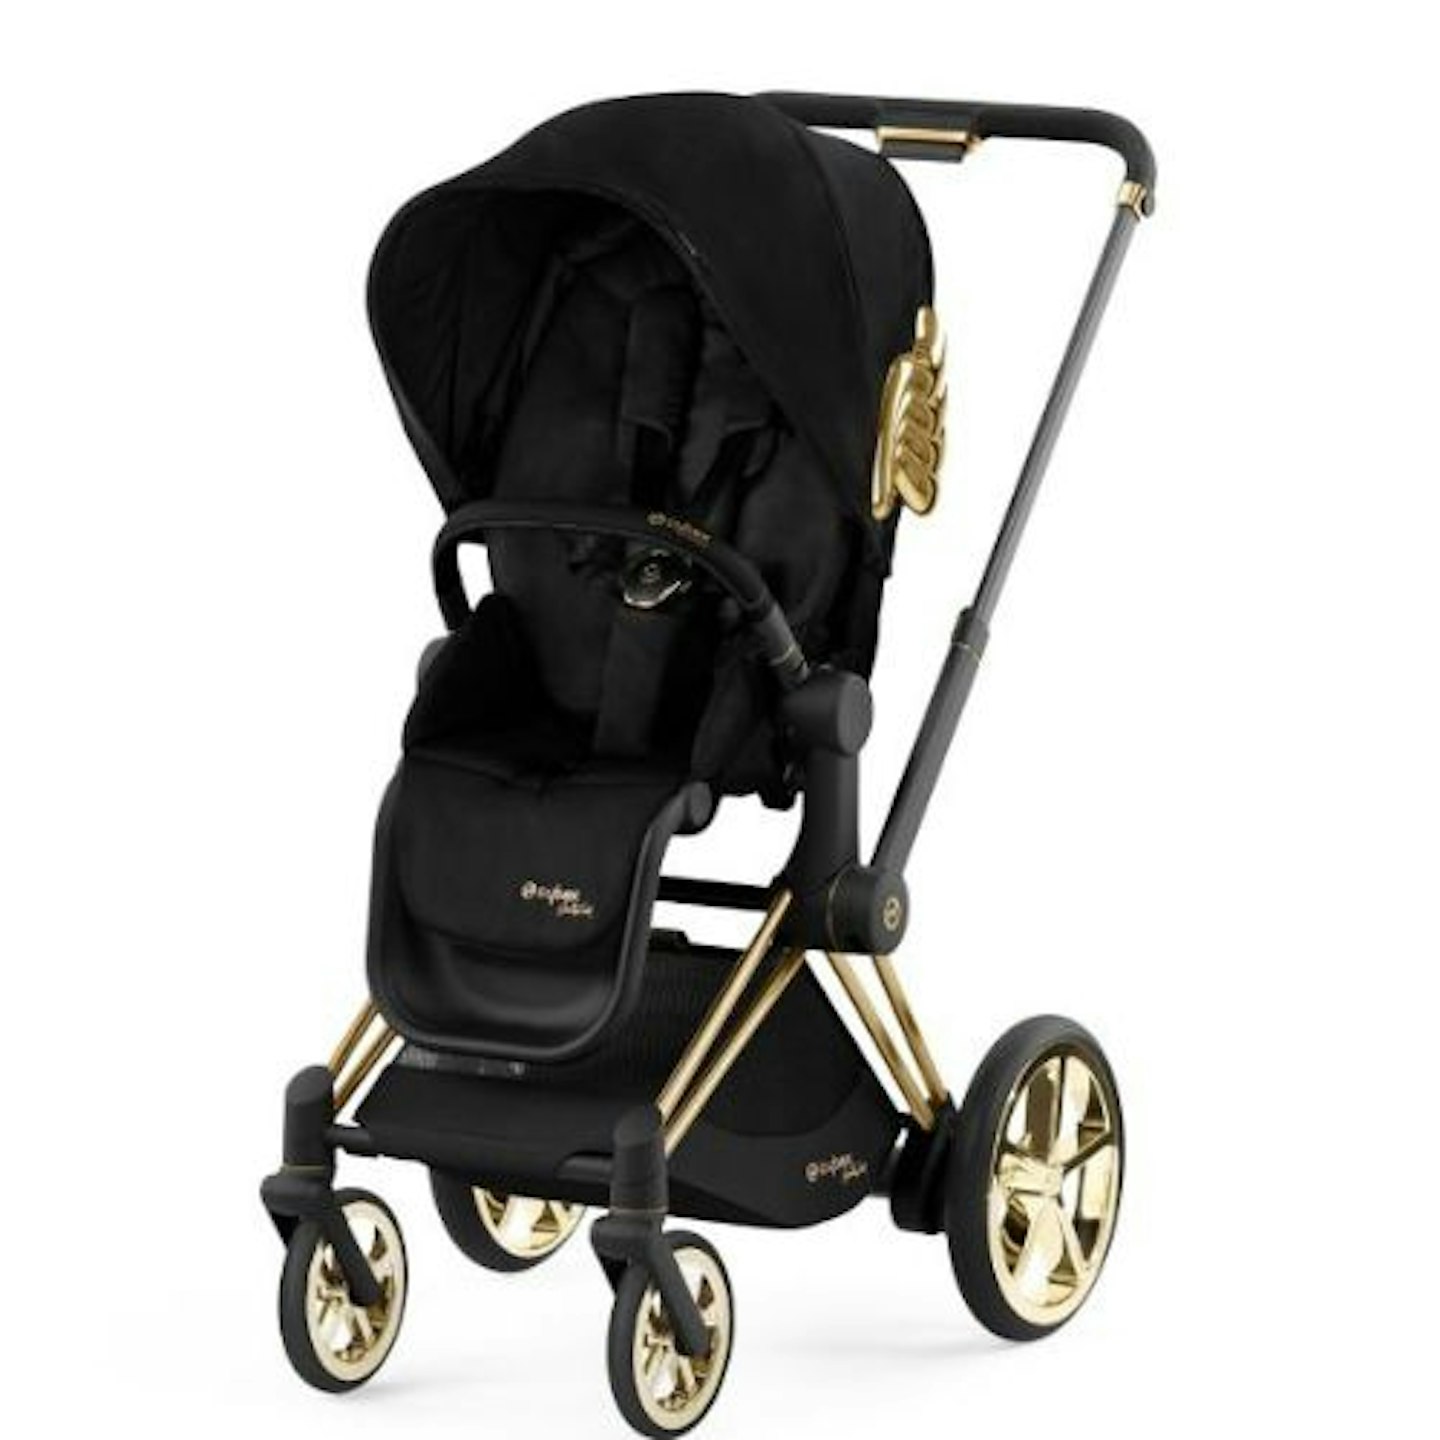 Best Pram and Stroller : Best CYBEX - e-PRIAM Winged Stroller and Seat